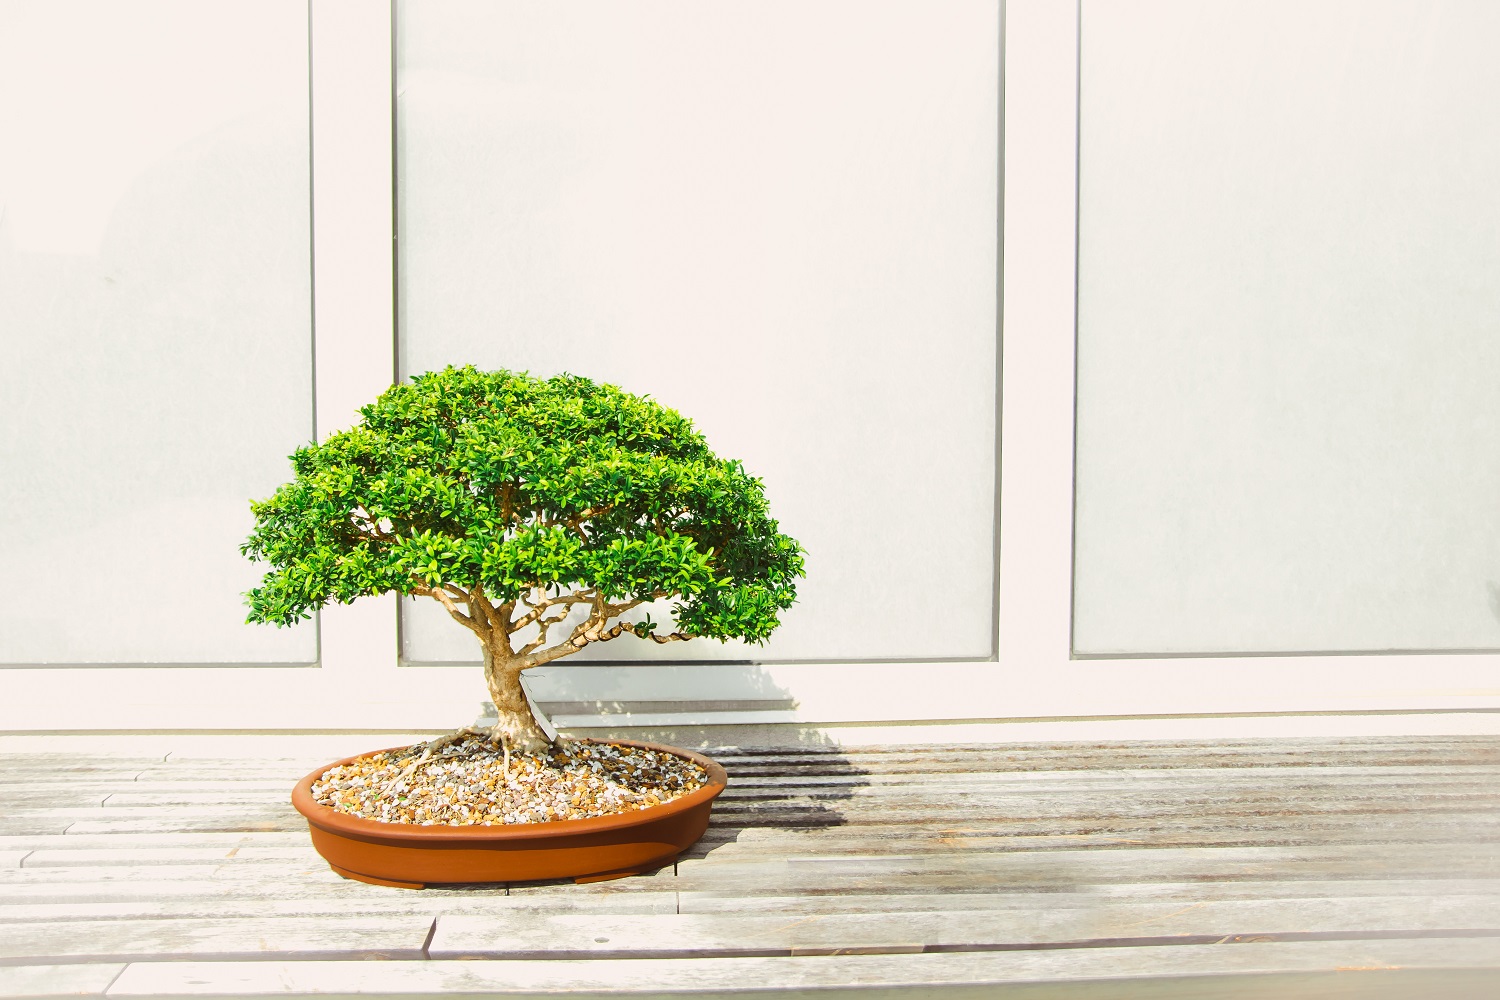 Learn the Art of Bonsai: Check Out These Free Online Courses